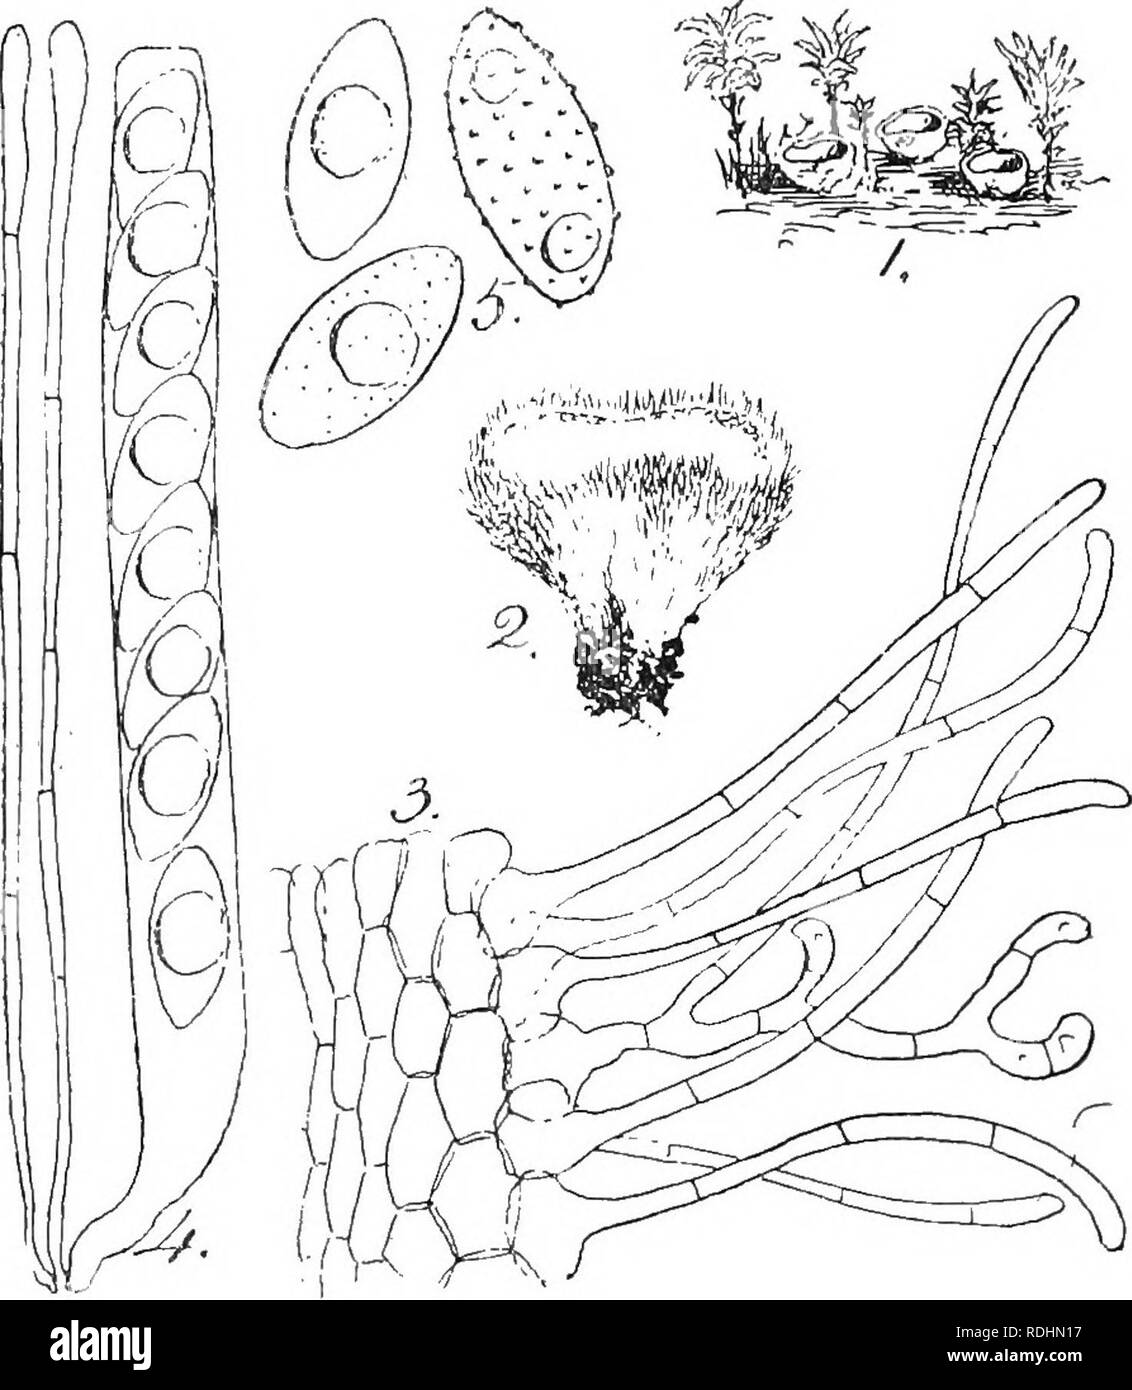 . British fungus-flora. A classified text-book of mycology. Fungi. NEOTTIELLA. 371 margin composed of hyaline, septate, cylindrical, thin-walled hyphae that are sometimes hranched, 80-100 x 6-7 /x, the hyphae are often arranged in little bundles; excipulum parenchymatous, cells elongated in the direction from base. Neottiella polytricM. Fig. 1, small specimens, natural size;âPig. 2, specimen, x 5; Fig. 3, section of portion of excipulum, x 400;âFig. 4, aacus â with spores and paraphyses, x 400;âFig. 5, spores in various stages of development, x 800. to margin ; cortical cells irregularly polj- Stock Photo